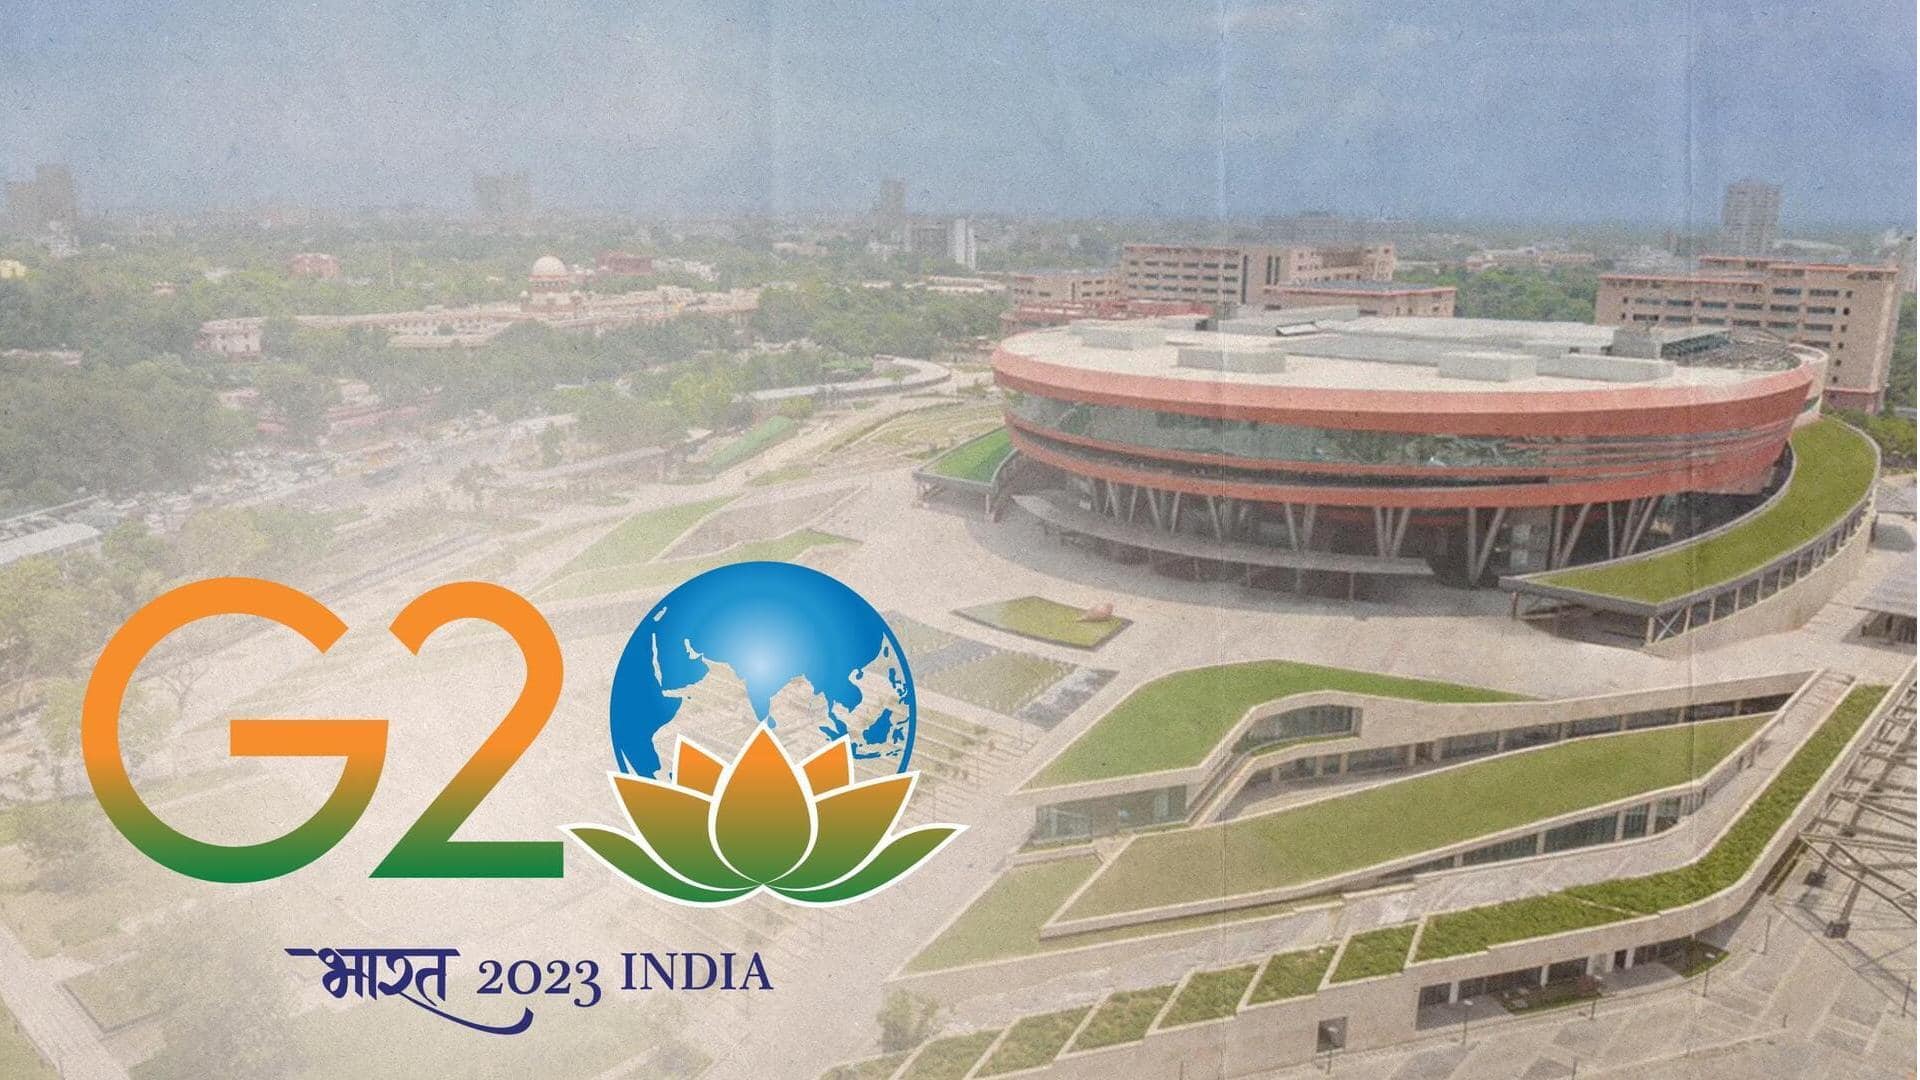 G20 Summit: Full schedule of high-profile two-day meet in Delhi